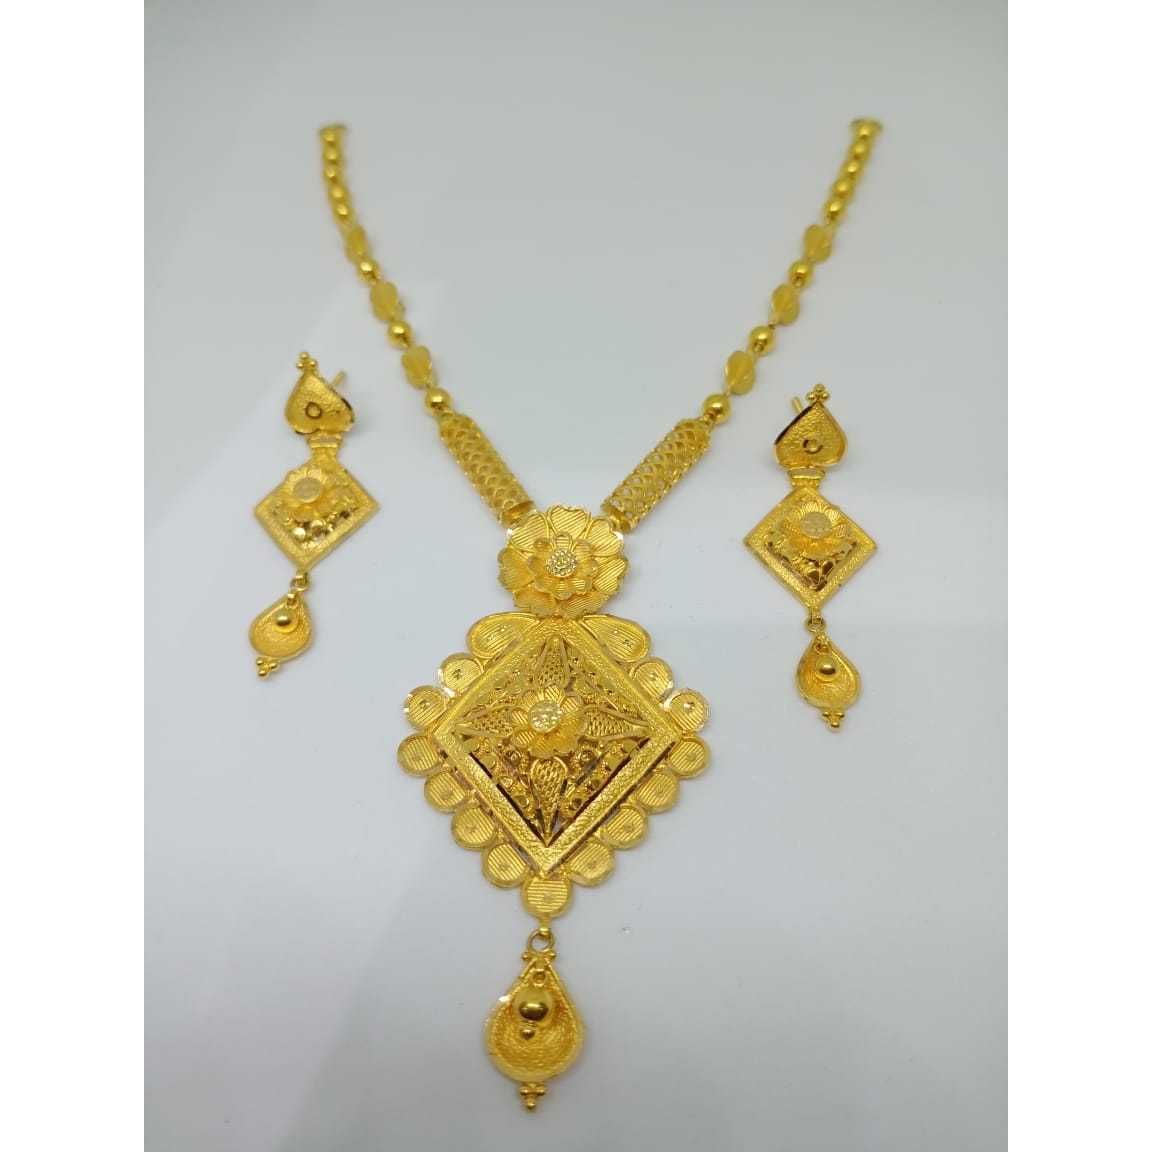 22kt yellow gold light weight necklace set bj-n018